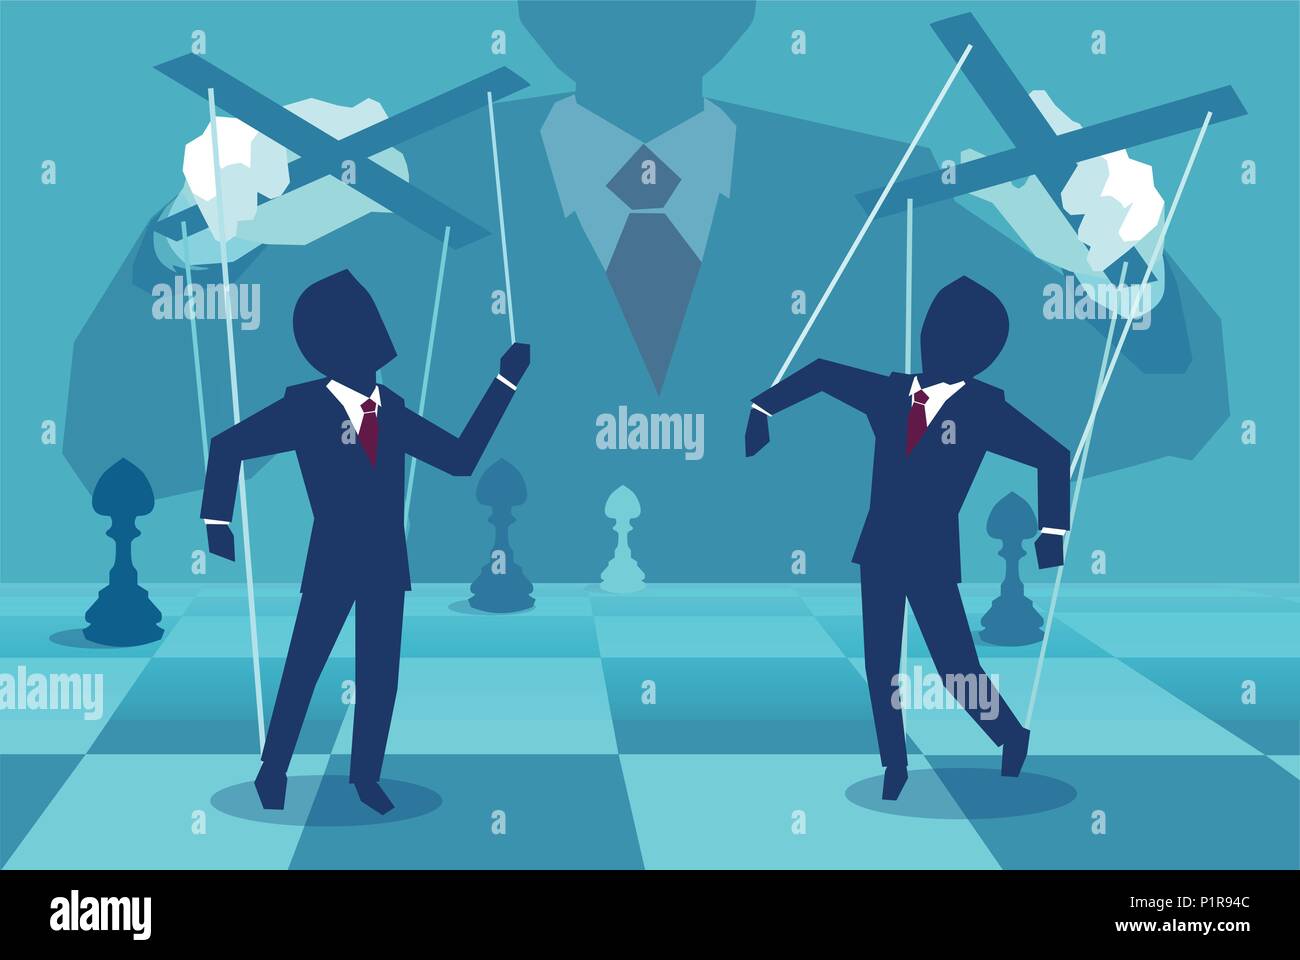 Vector concept illustration of person manipulating people behind the scenes. Stock Vector